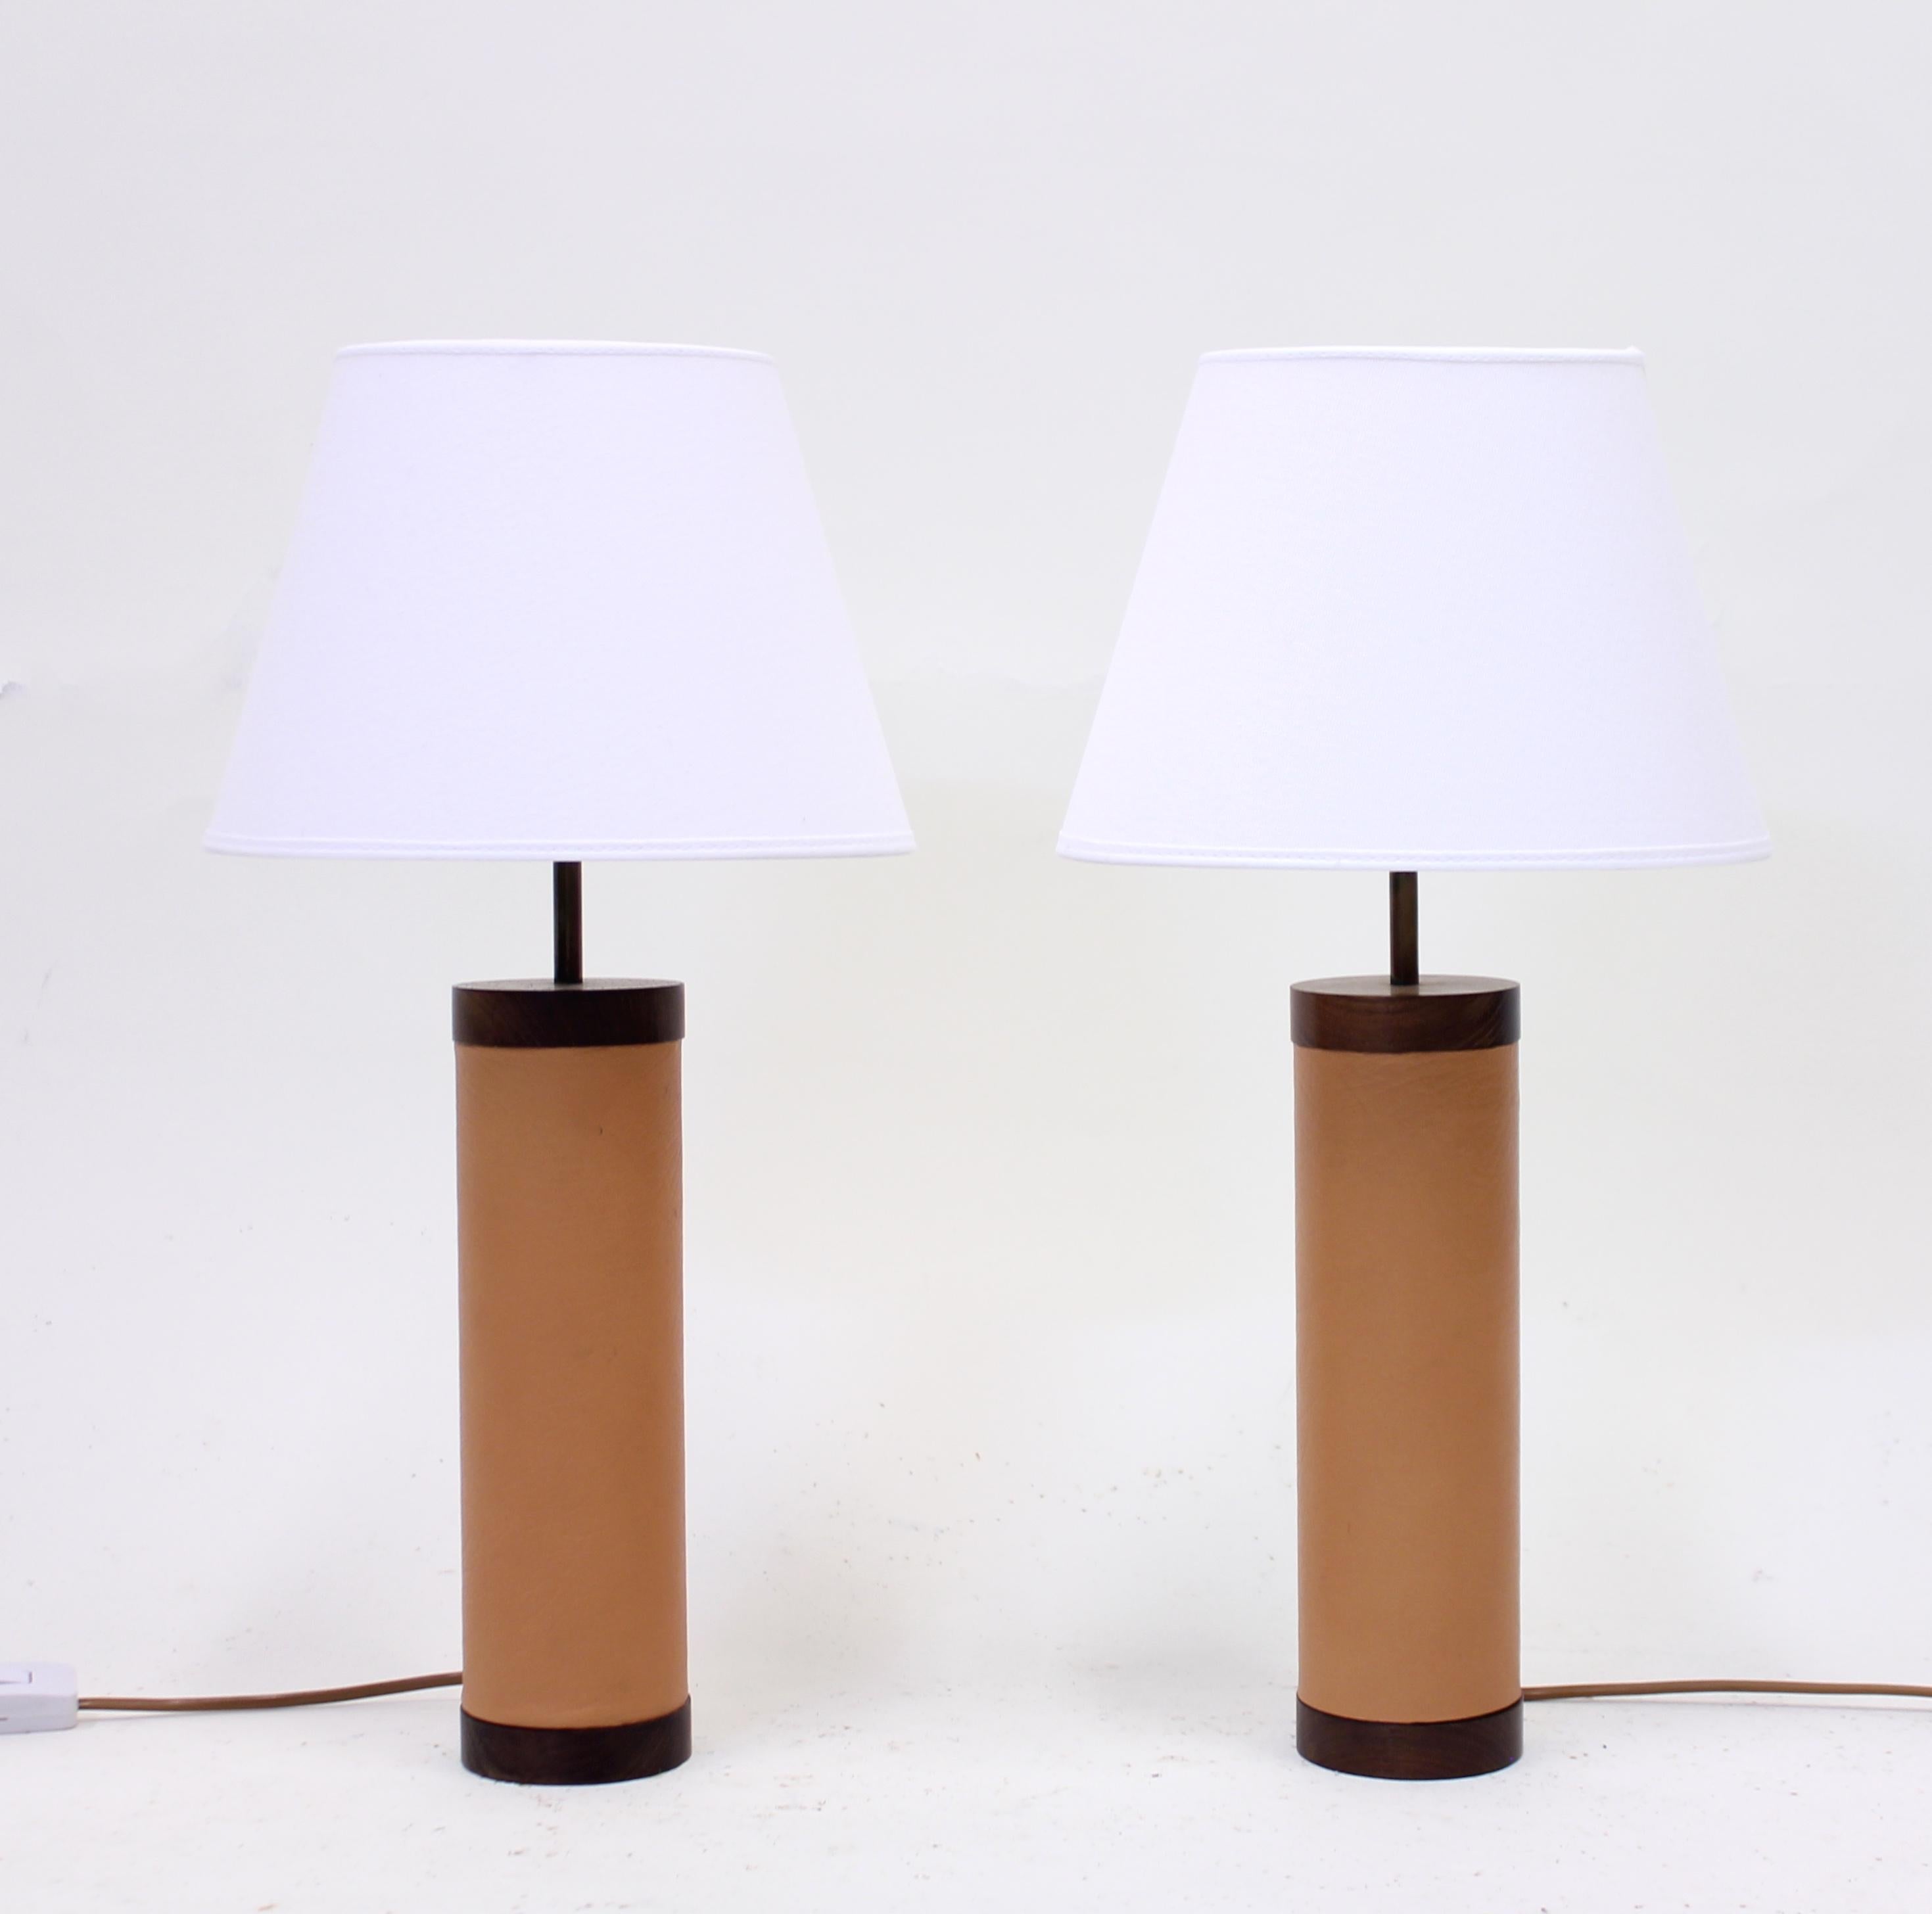 Pair of table lamps from the 1960s in rosewood and light brown leather attributed to Swedish manufacturer Bergboms. New white shades. Very good condition with minimal ware.